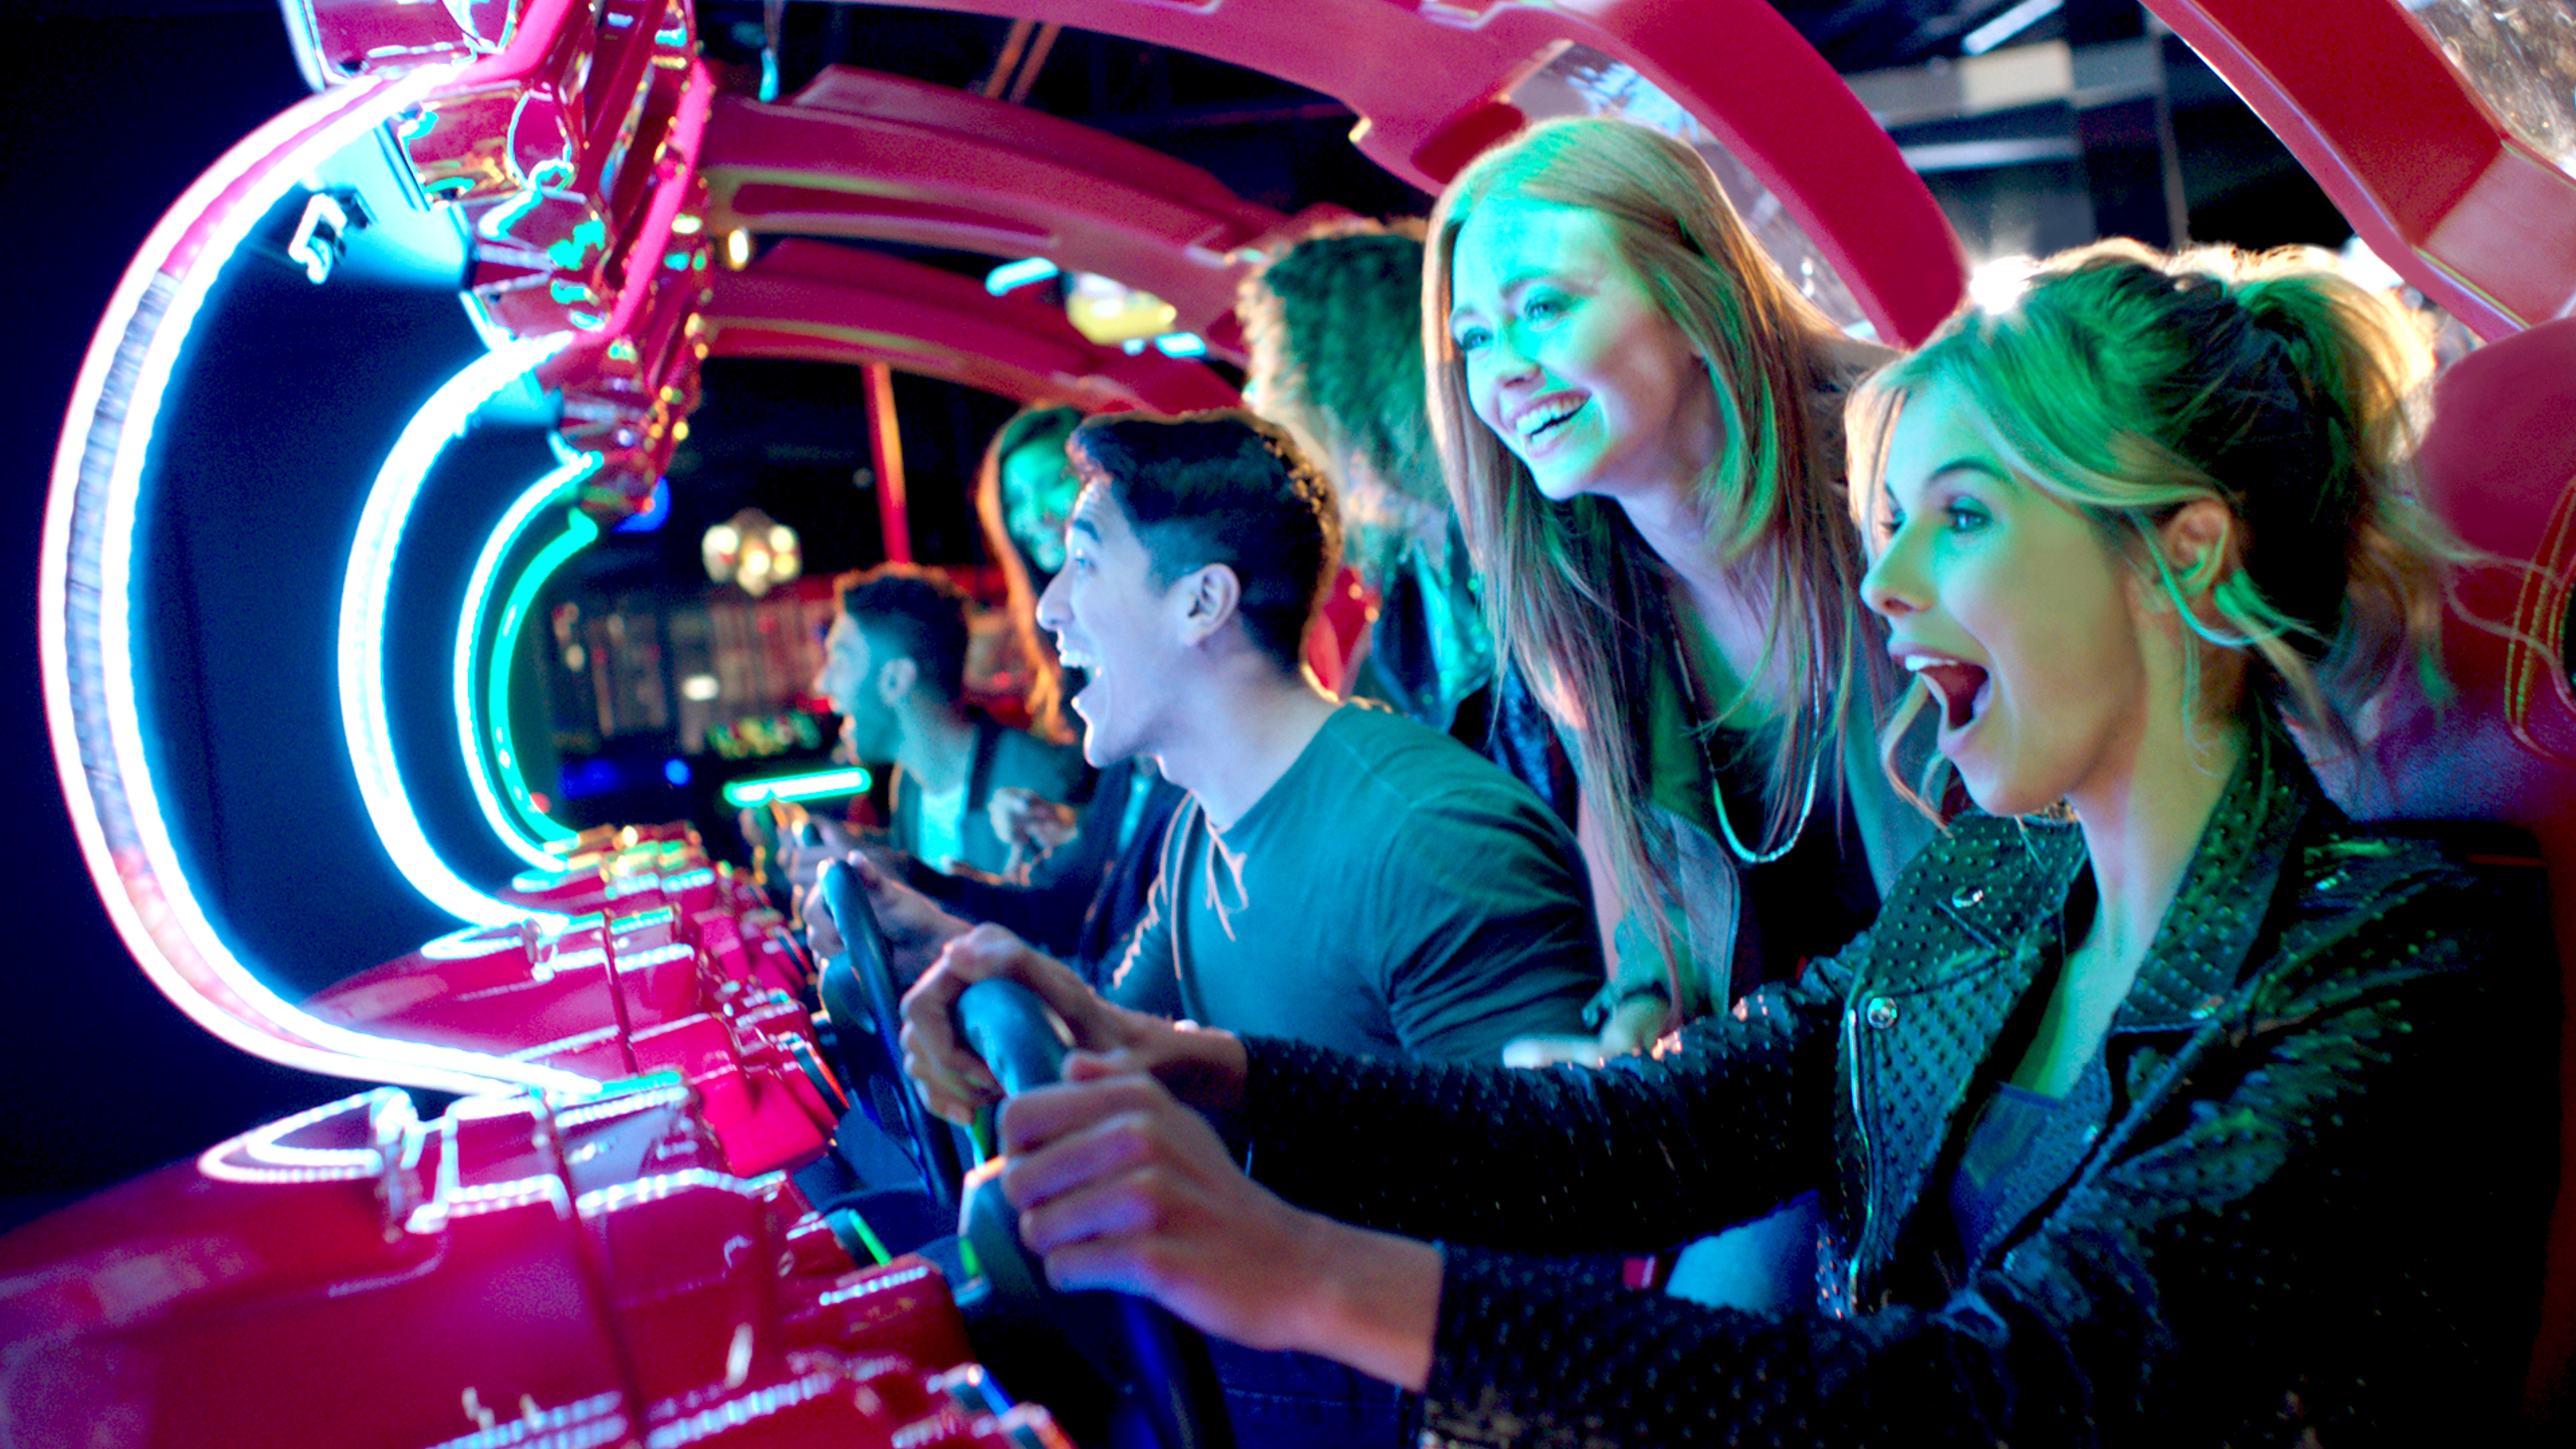 Play Games at Dave and Buster's